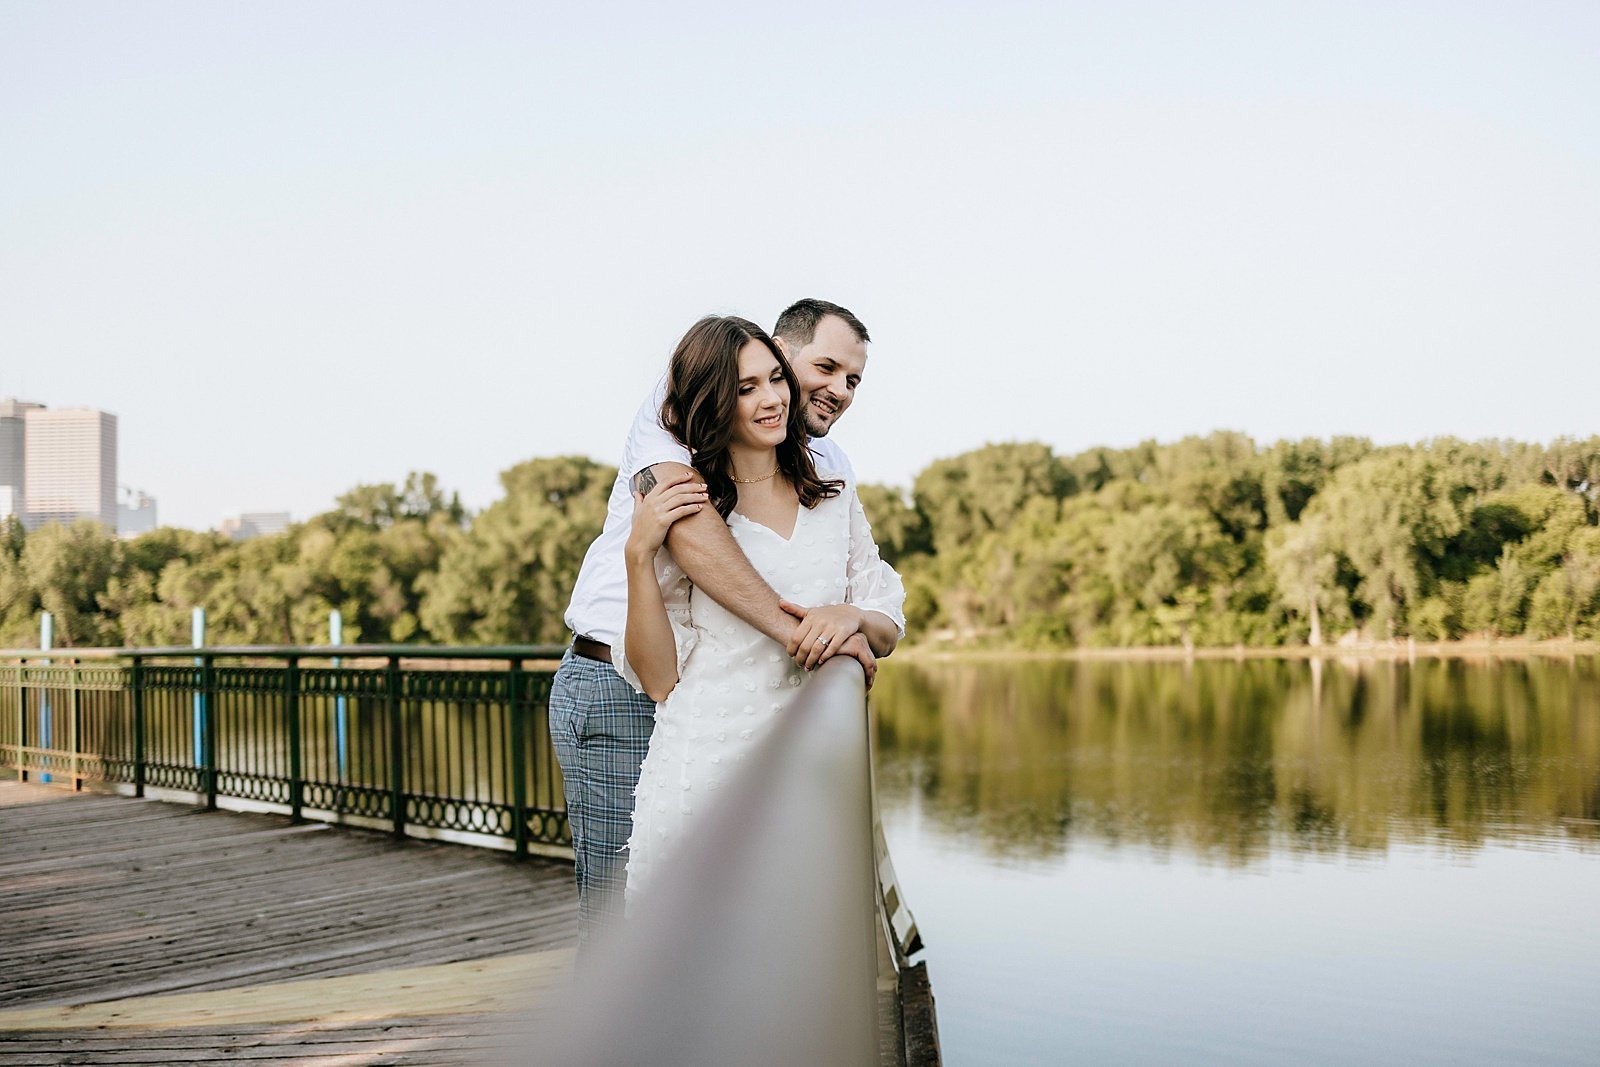  Couple hugging on a dock over pond at Boom Island Park for their engagement session.  